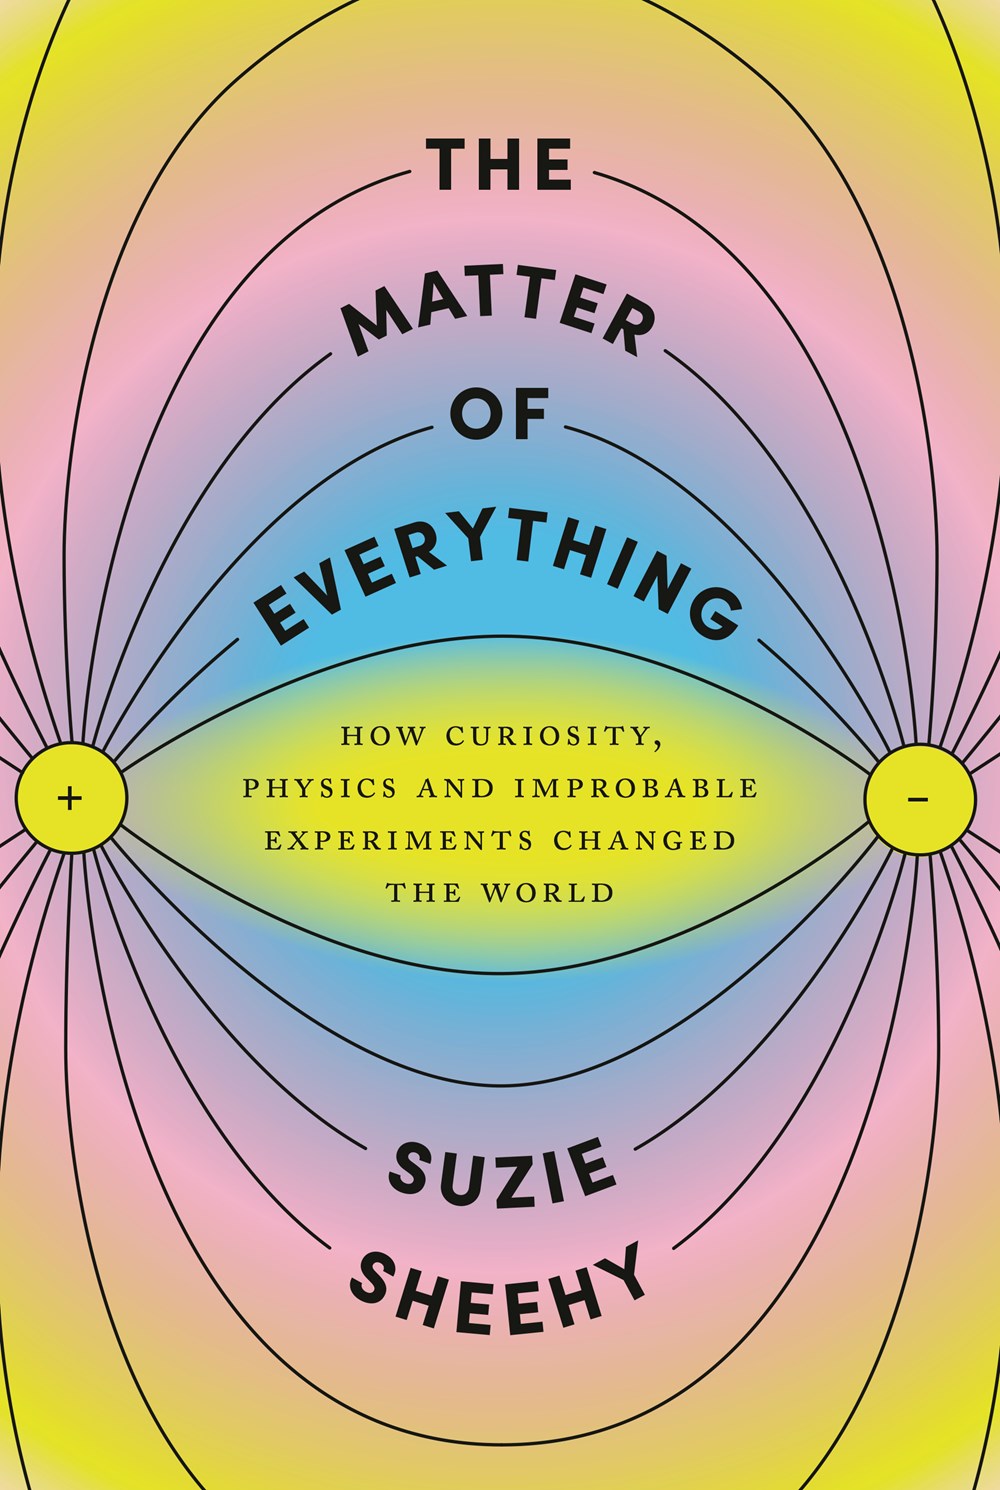 The Matter of Everything by Suzie Sheehy